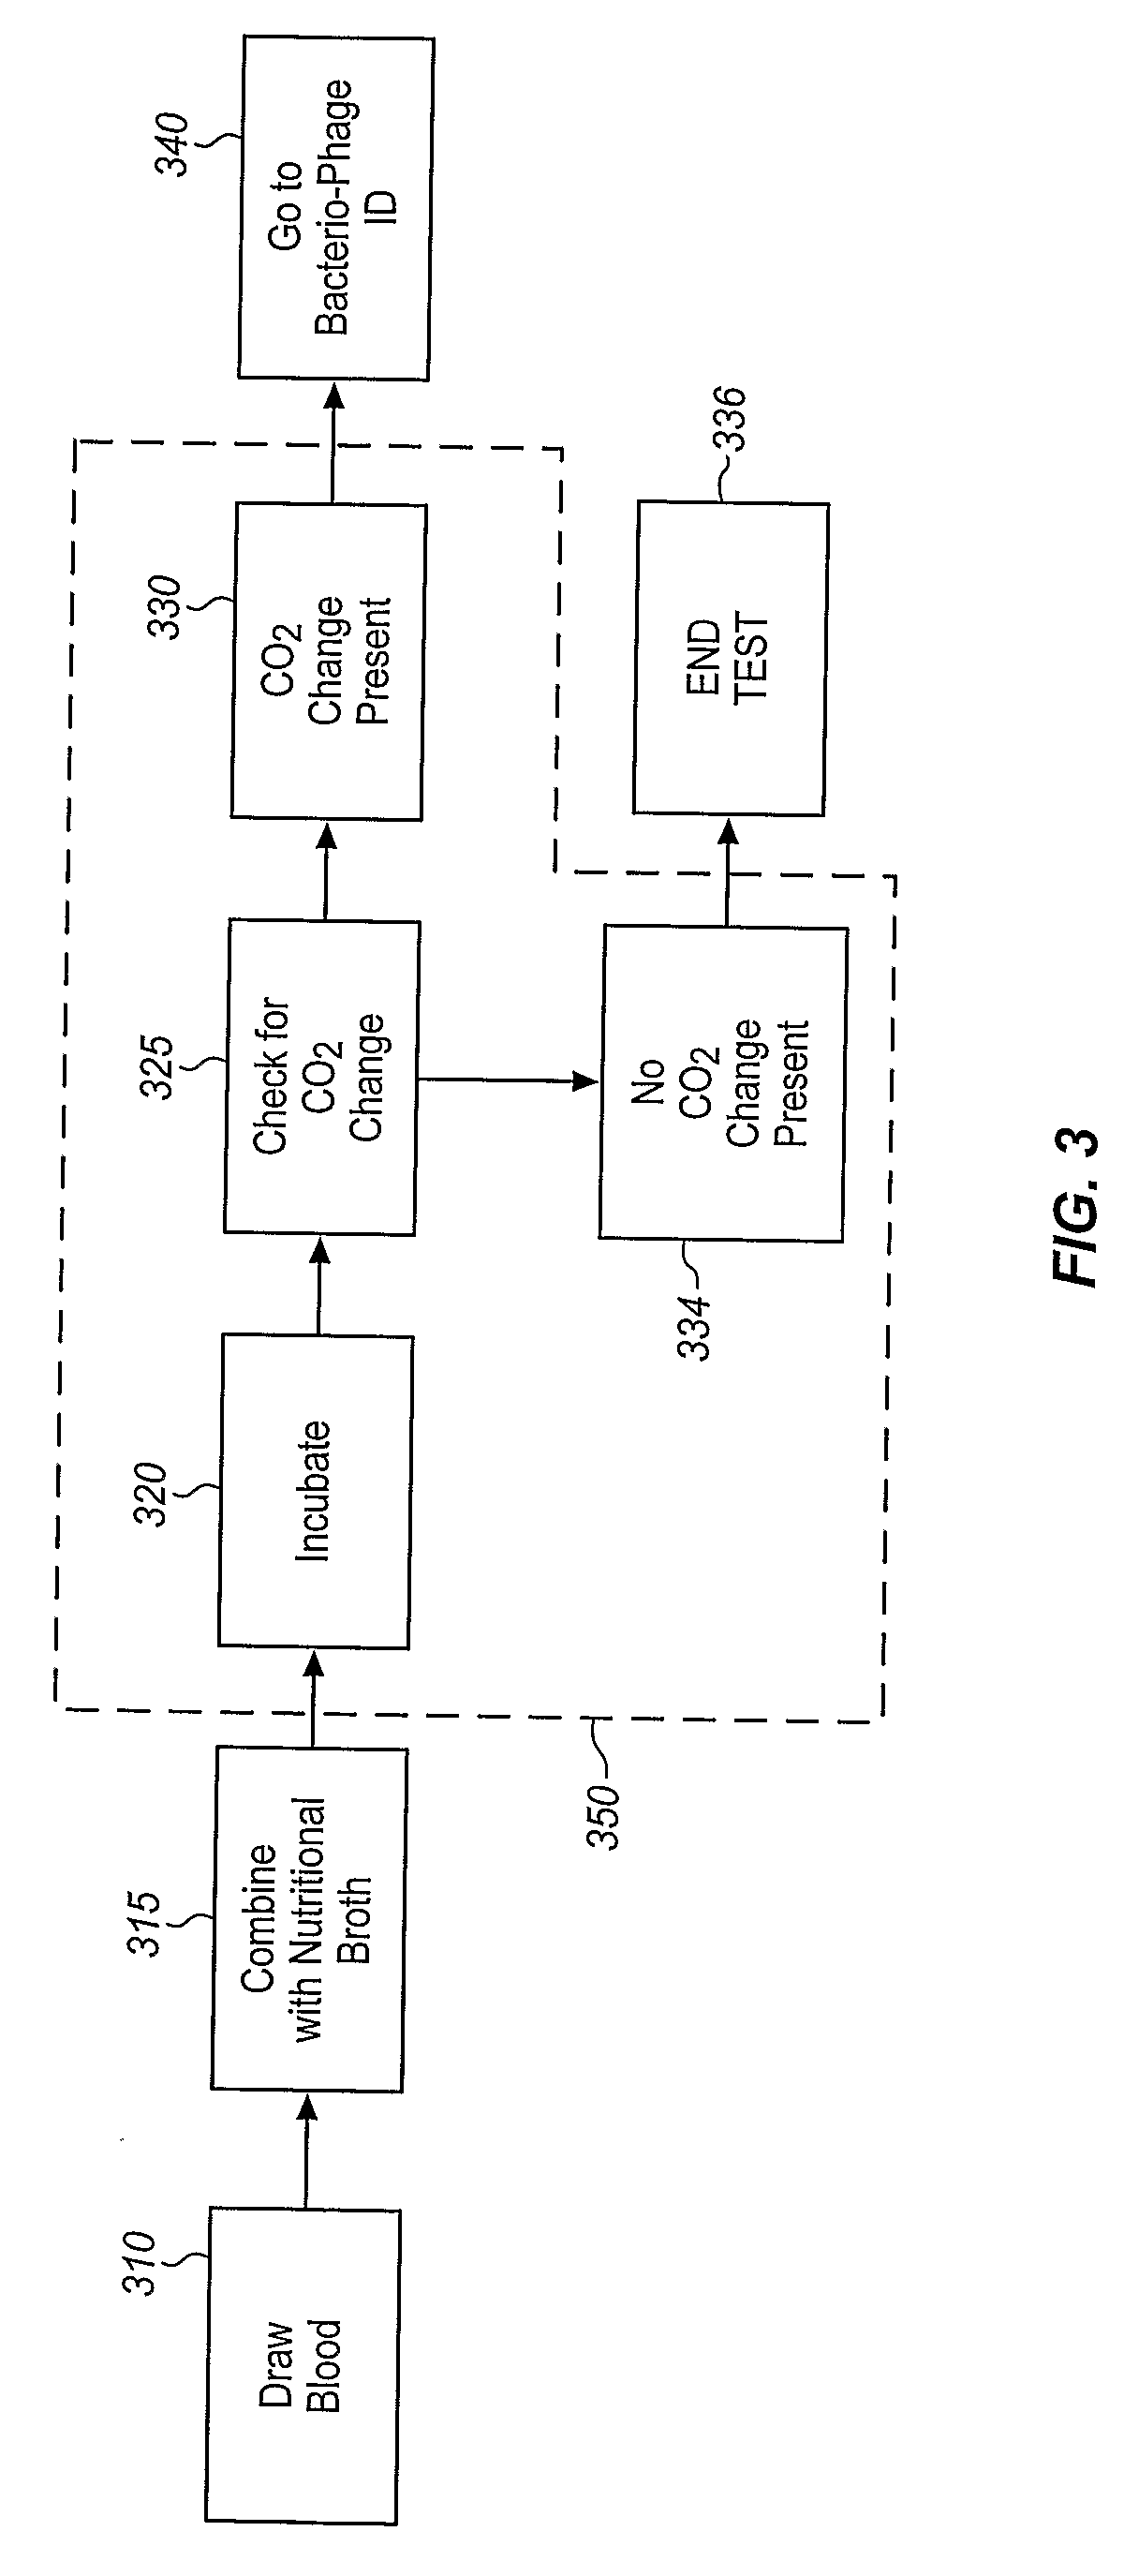 Method and Apparatus for Identification of Microorganisms Using Bacteriophage